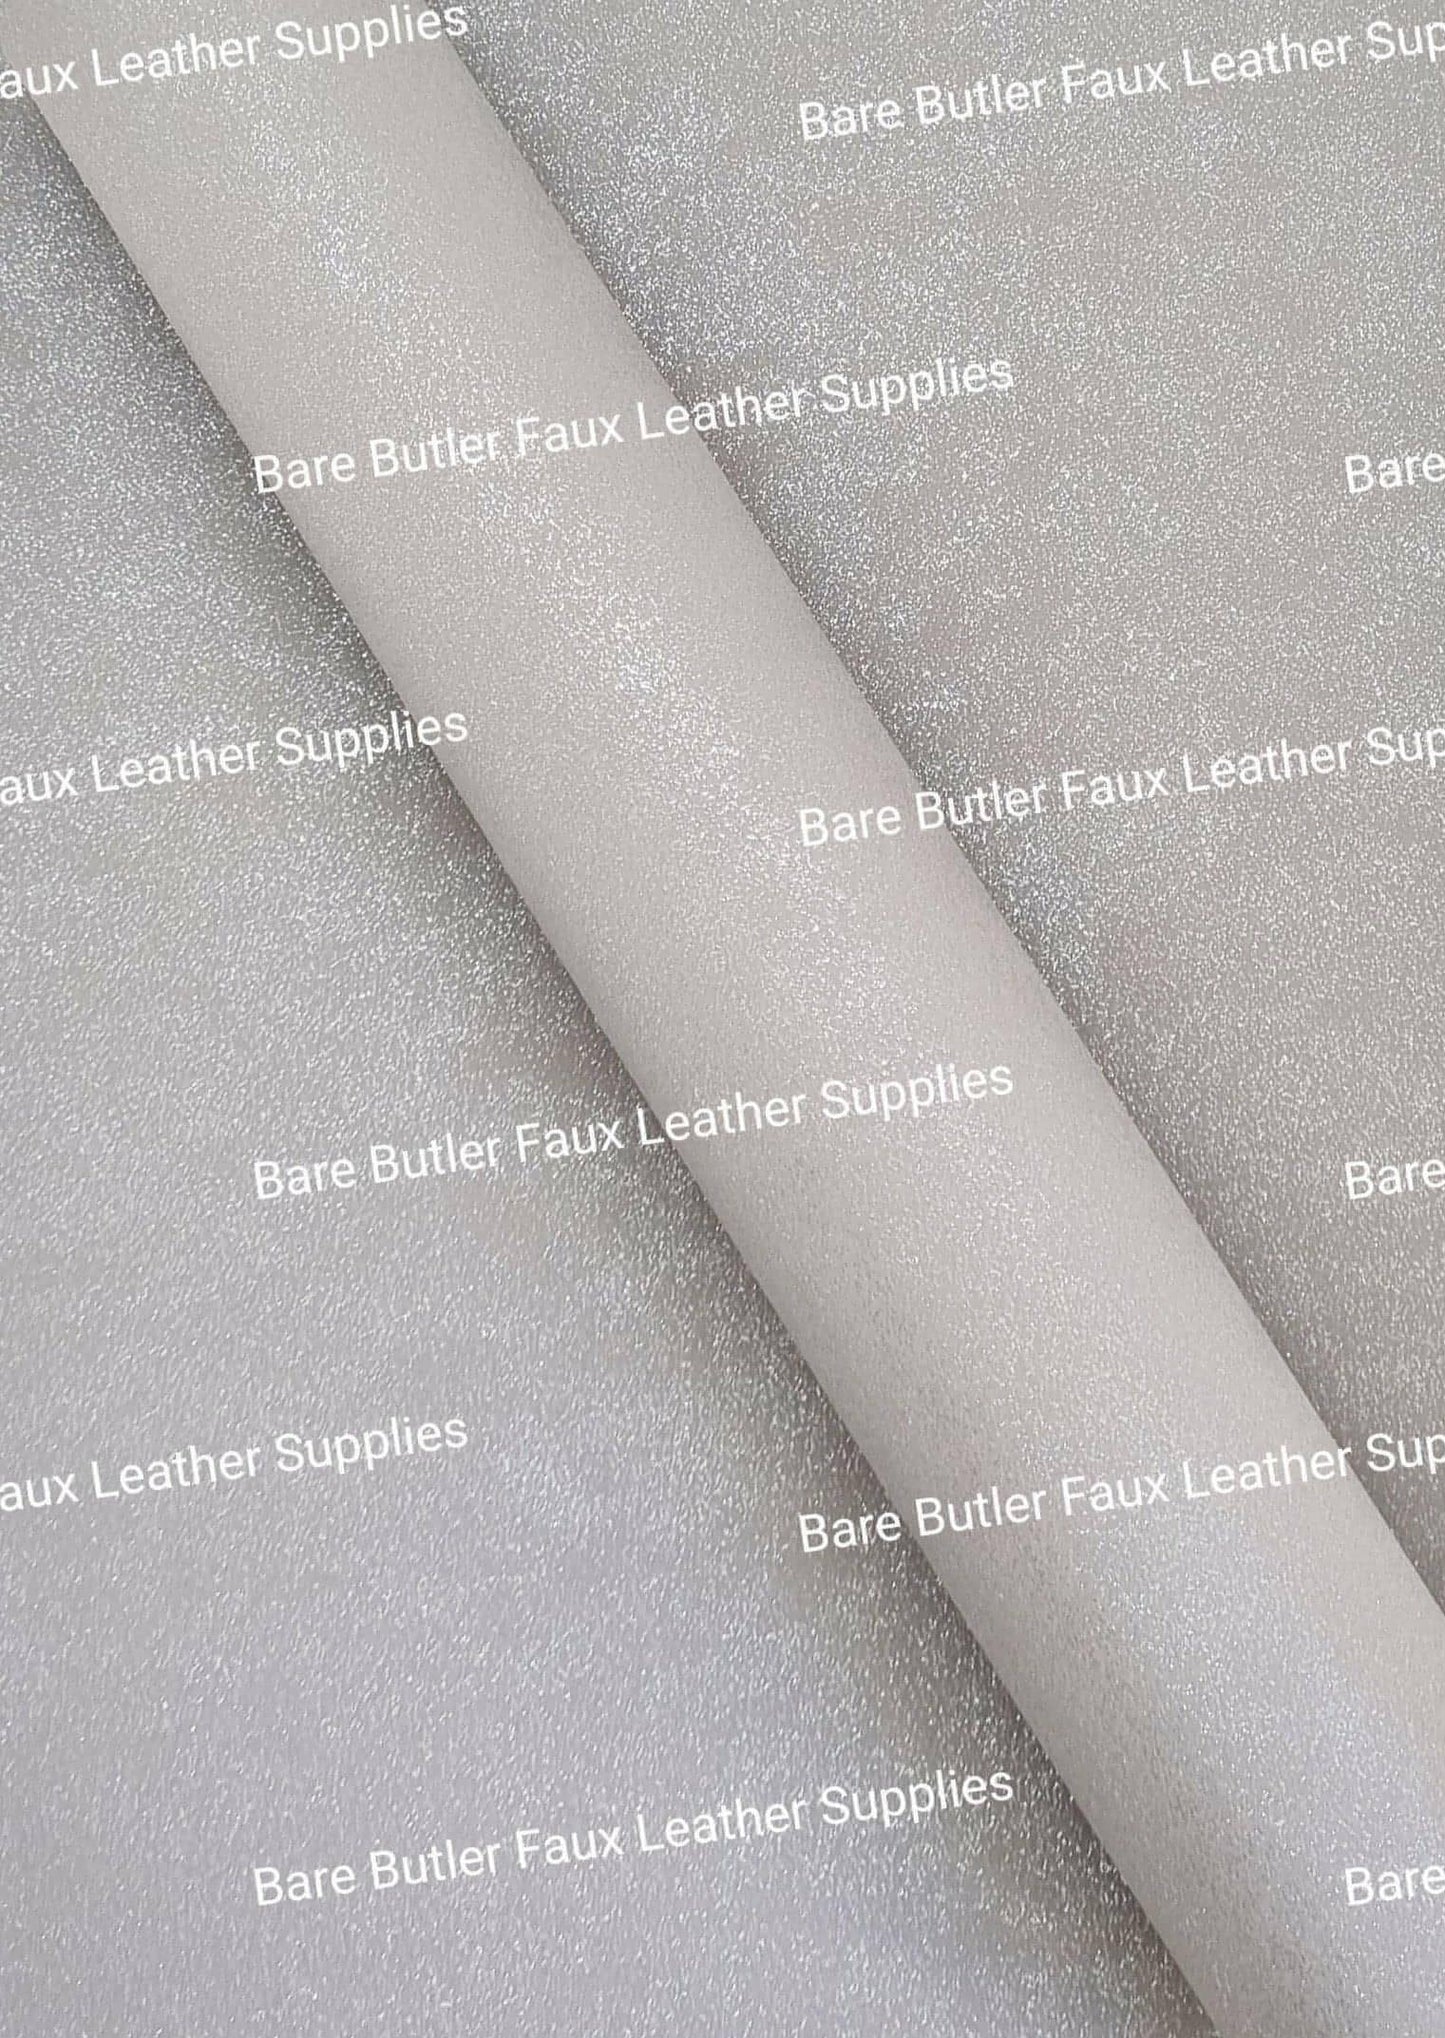 Glitter Suede - Grey - Faux, Faux Leather, Glitter, grey, Suede - Bare Butler Faux Leather Supplies 